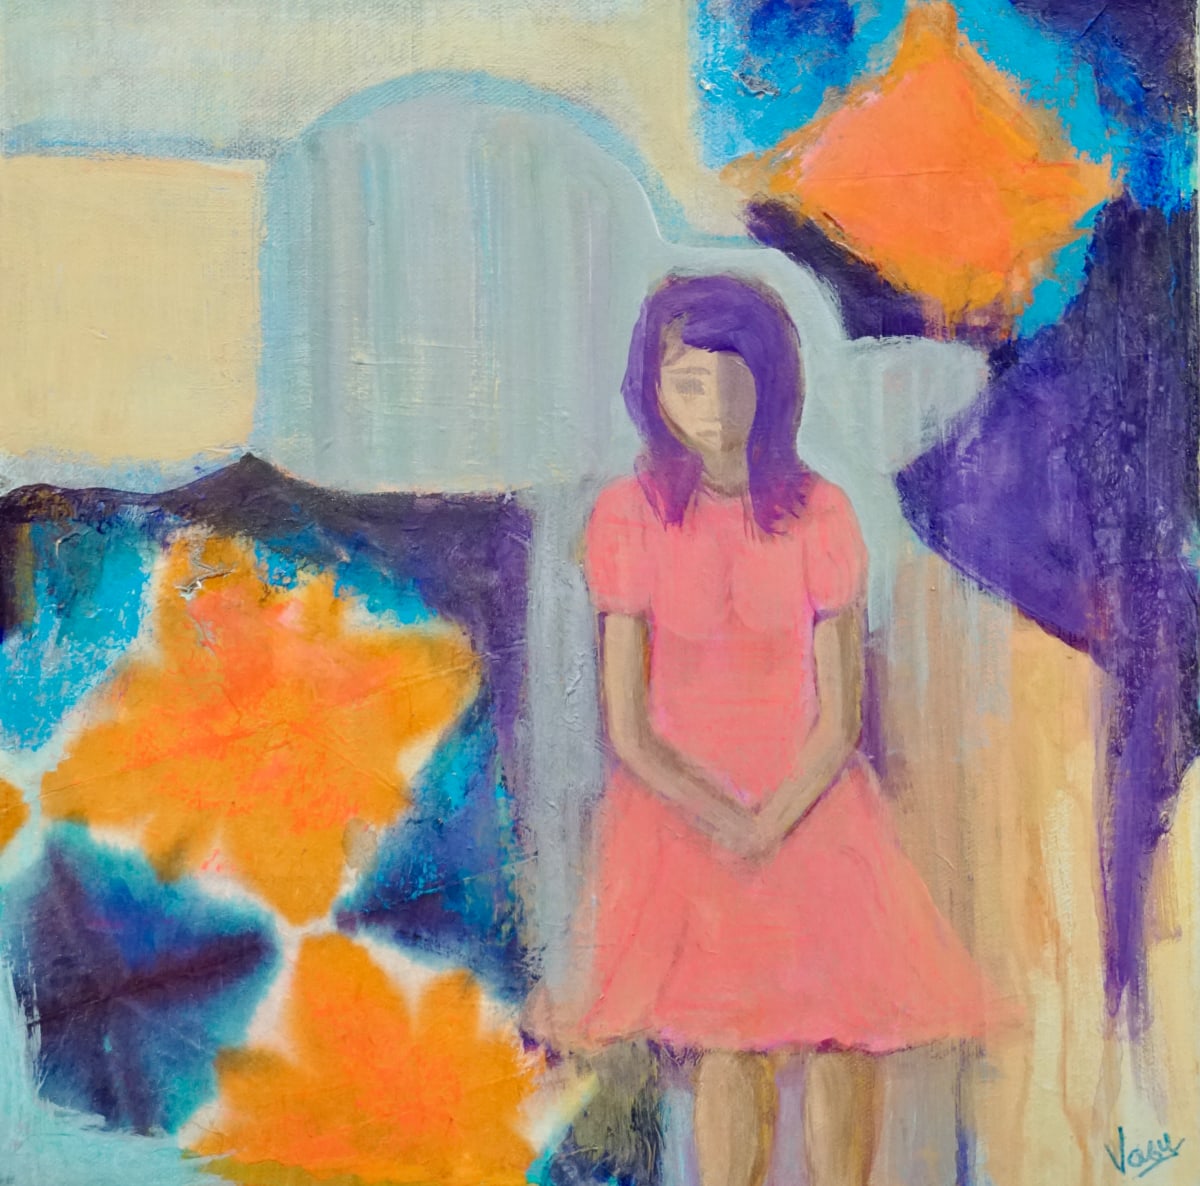 Penitent by Vasu Tolia  Image: A bright artwork showing girl standing in a pink dress almost apologetically after a mischief. This artwork has a colorful, geometric background.